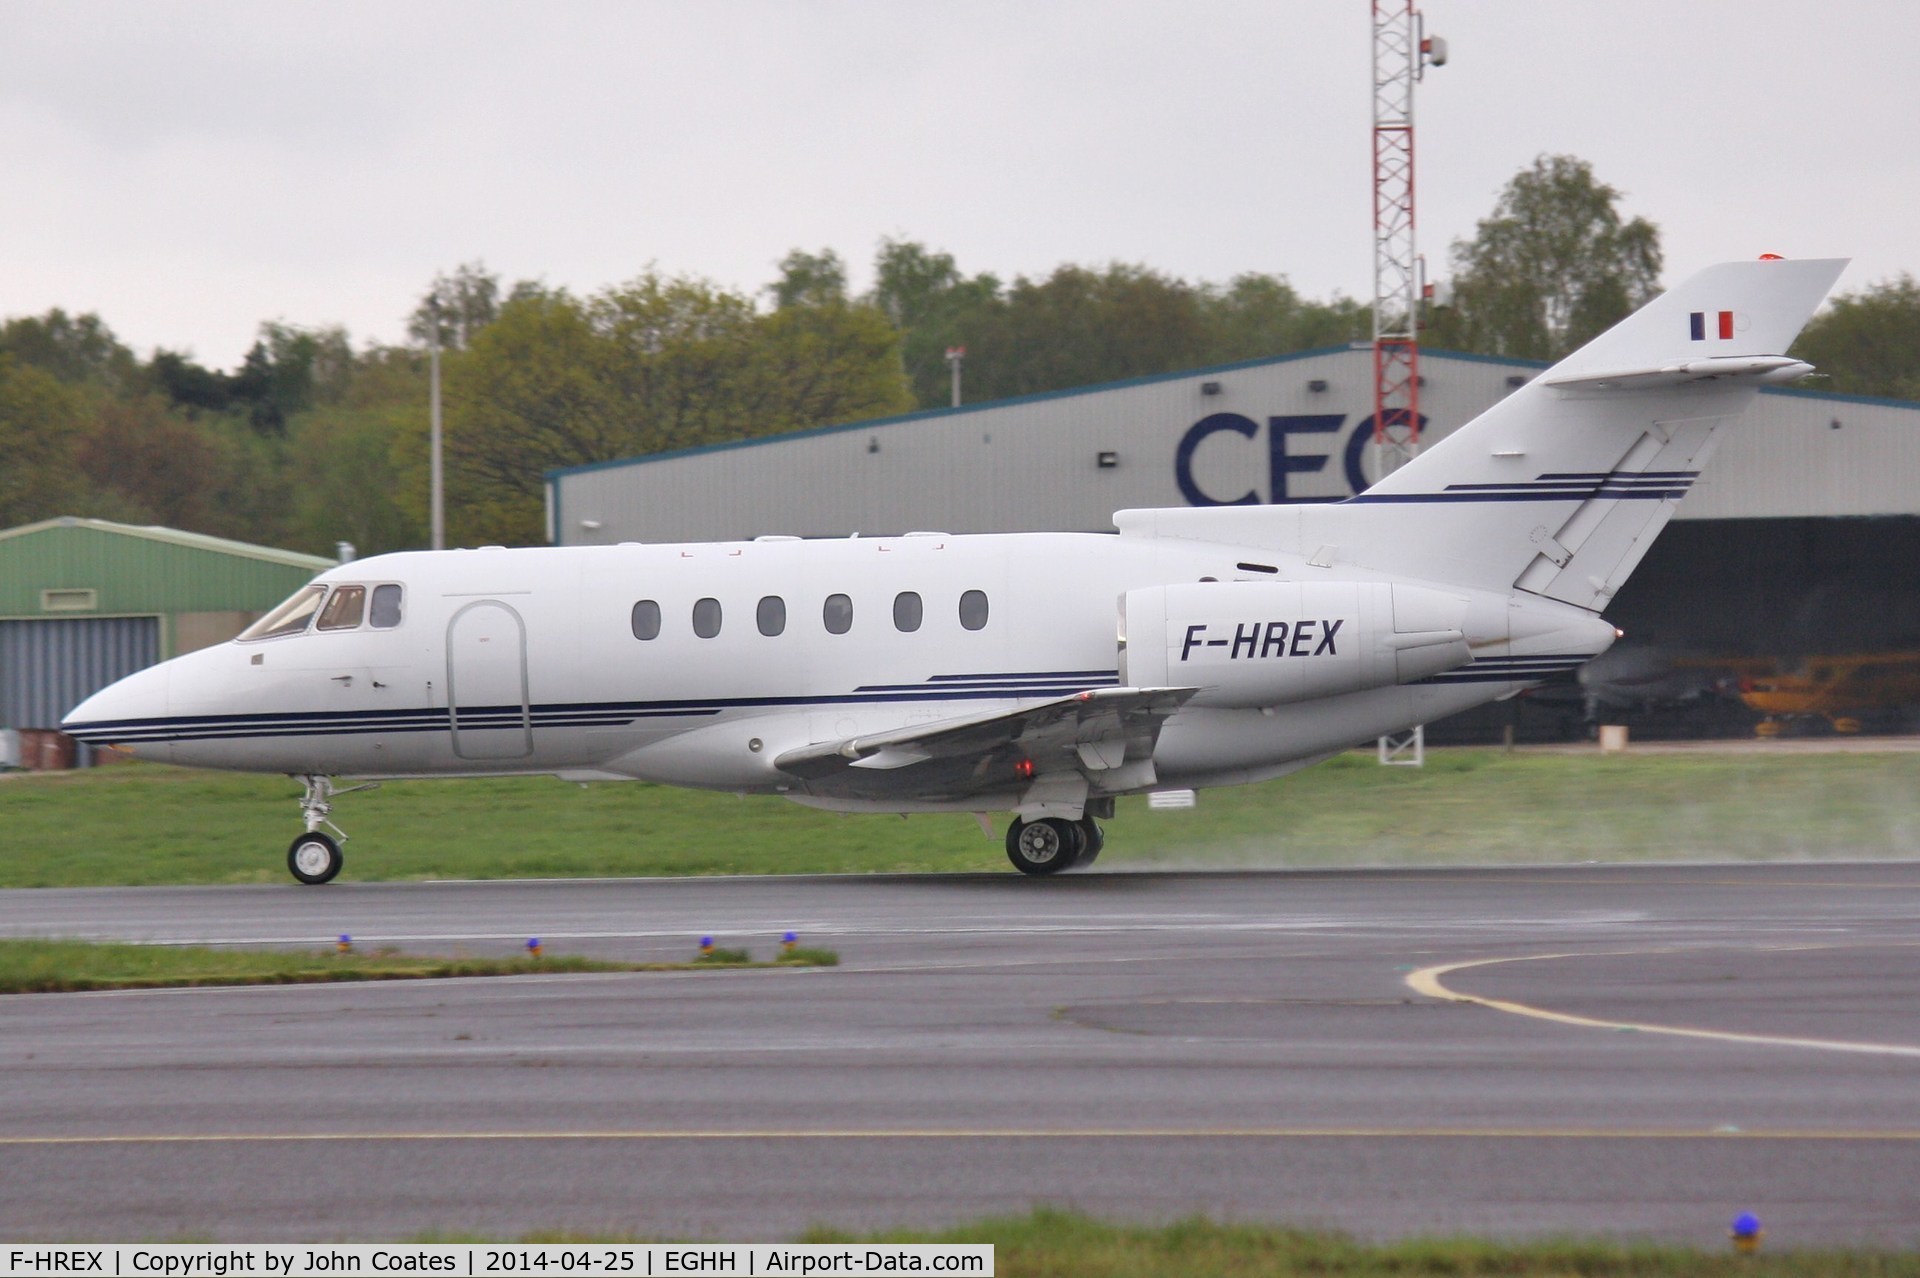 F-HREX, 1997 Raytheon Hawker 800XP C/N 258335, Departing to Biggin Hill after weather diversion